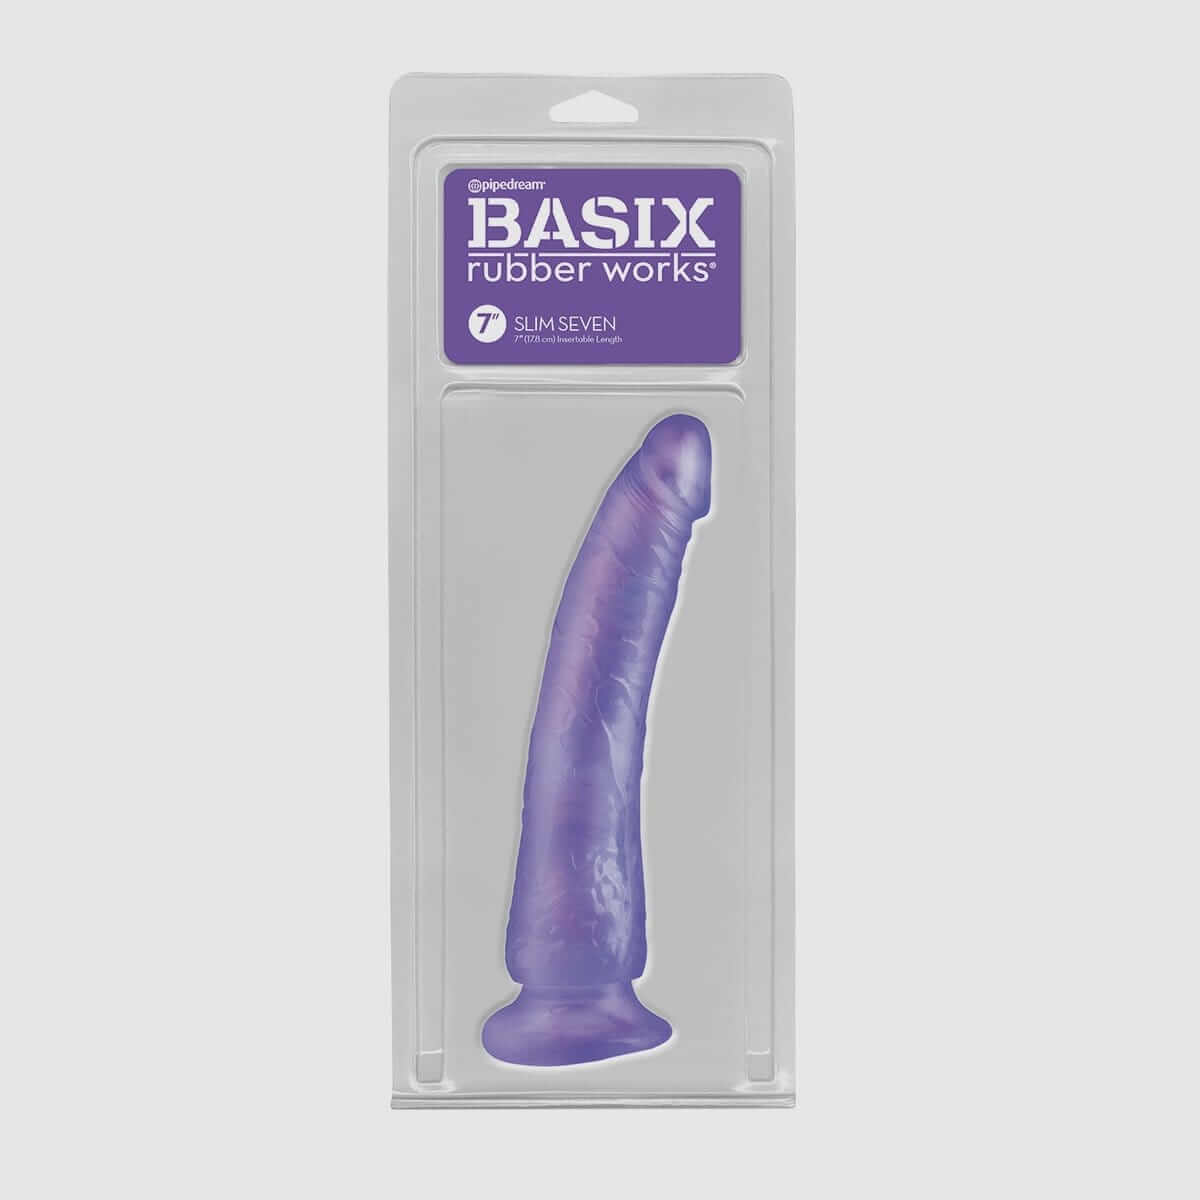 Basix Rubber Works - Slim 7" with Suction Cup - Purple - Thorn & Feather Sex Toy Canada